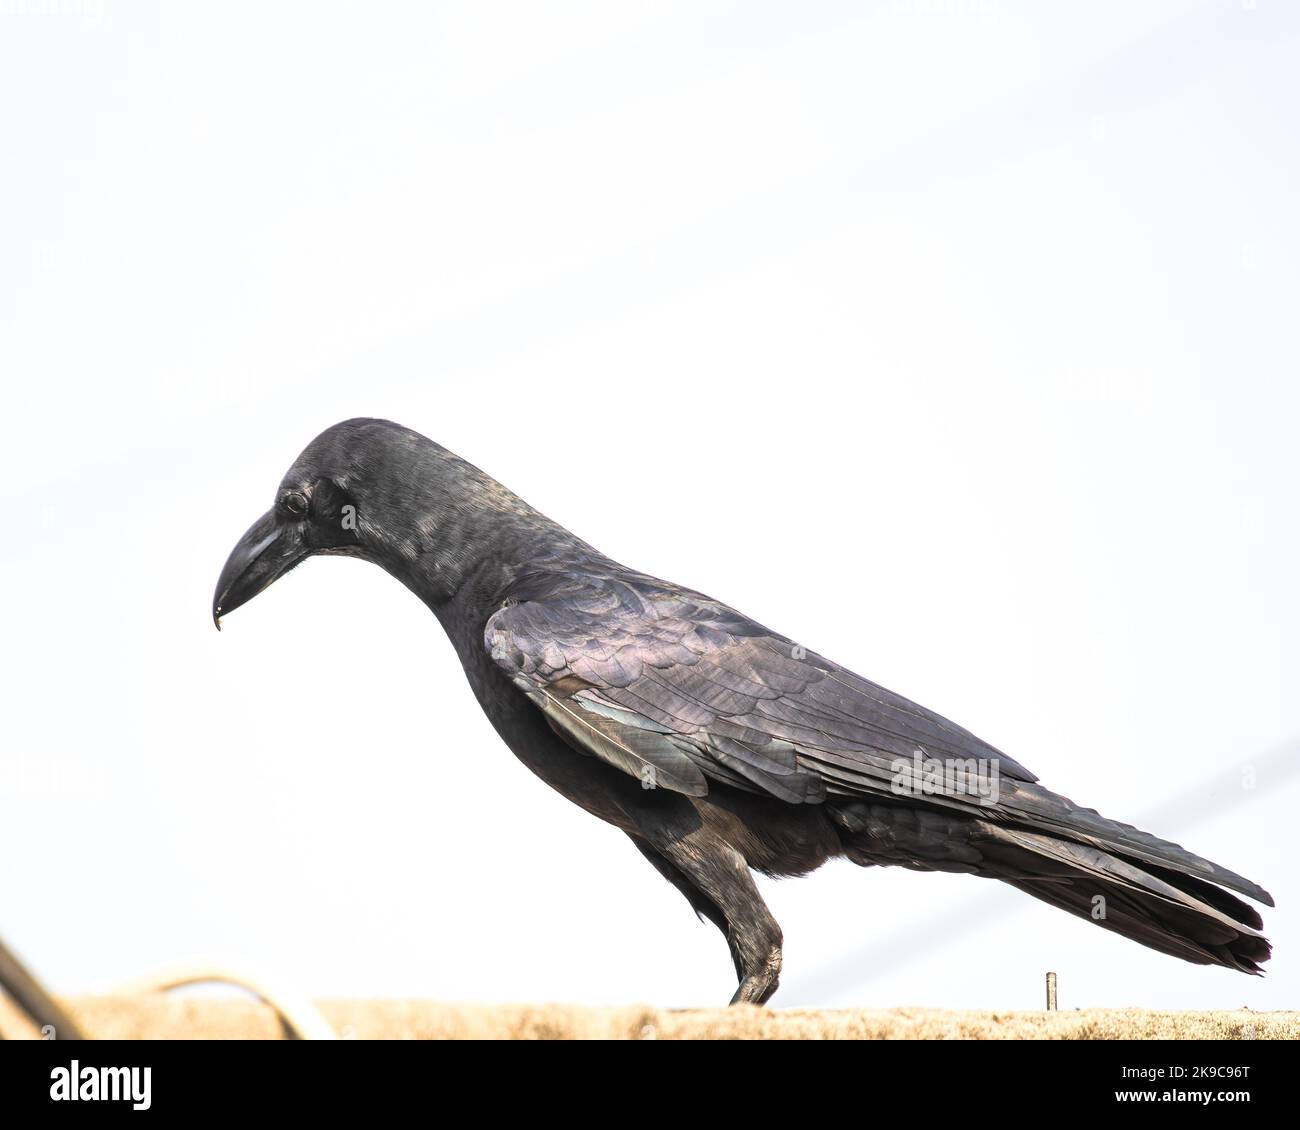 A Common raven looking down from a wall Stock Photo